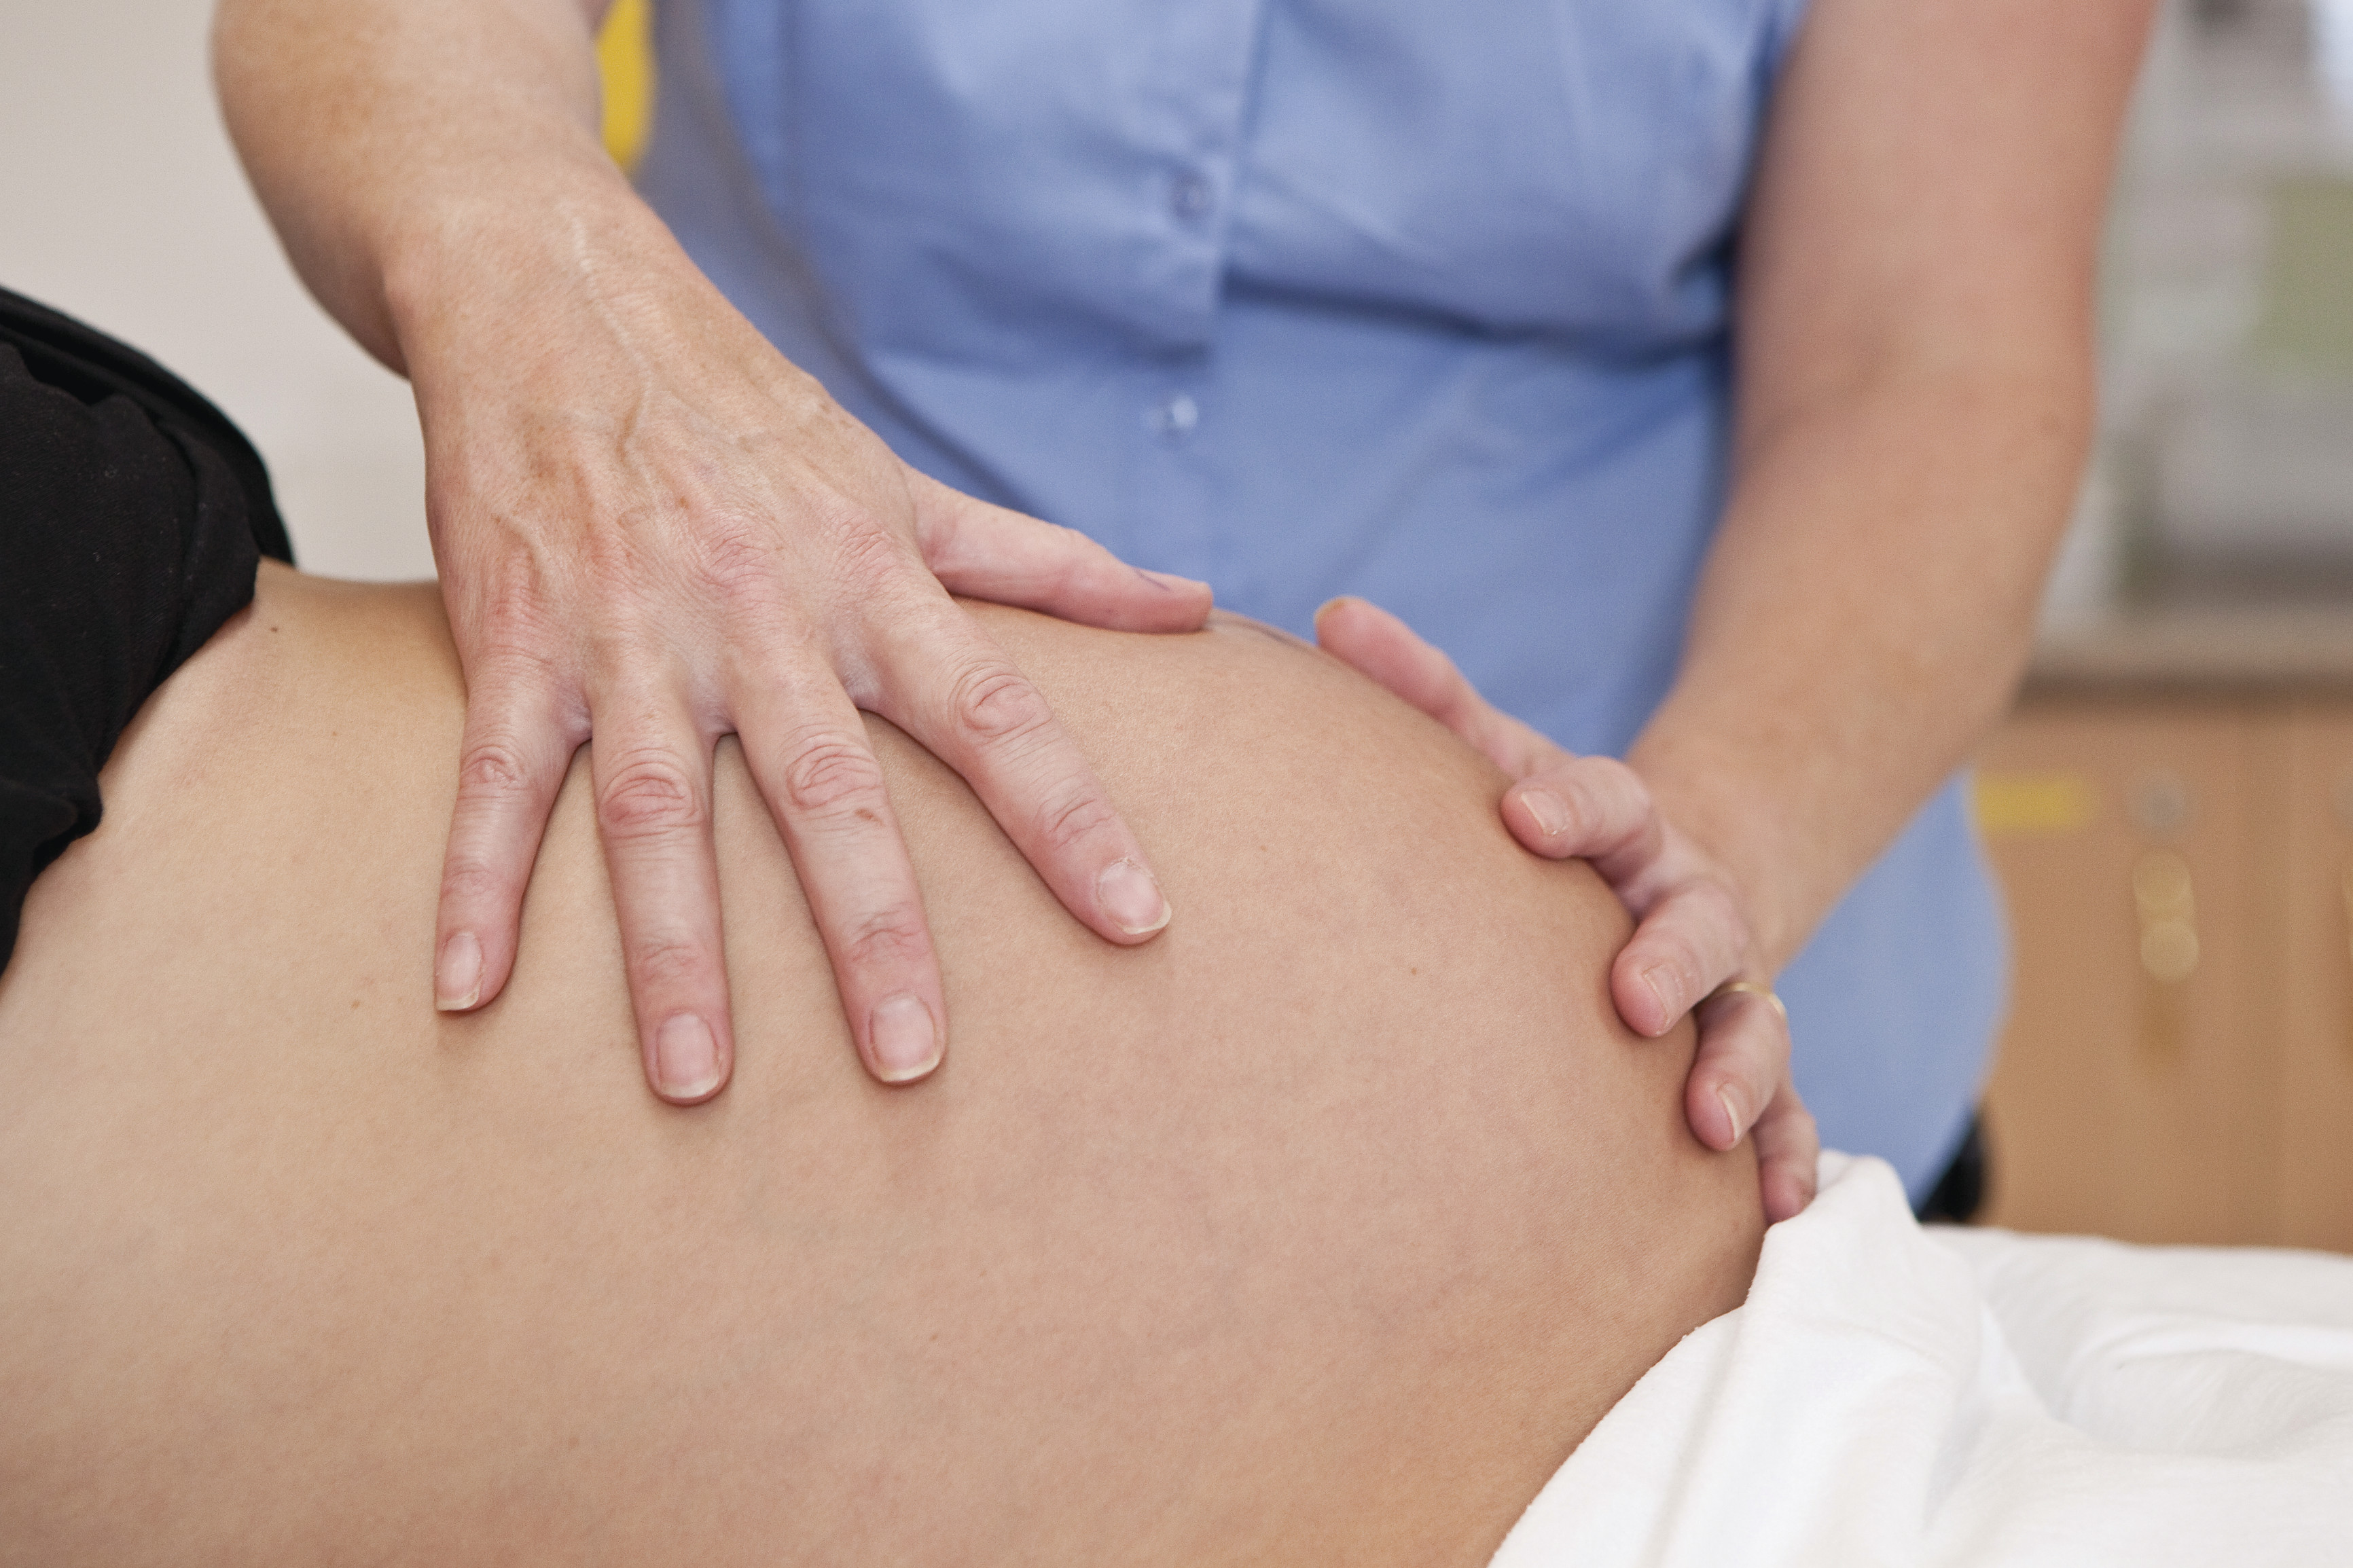 Midwife palpating abdomen of pregnant woman